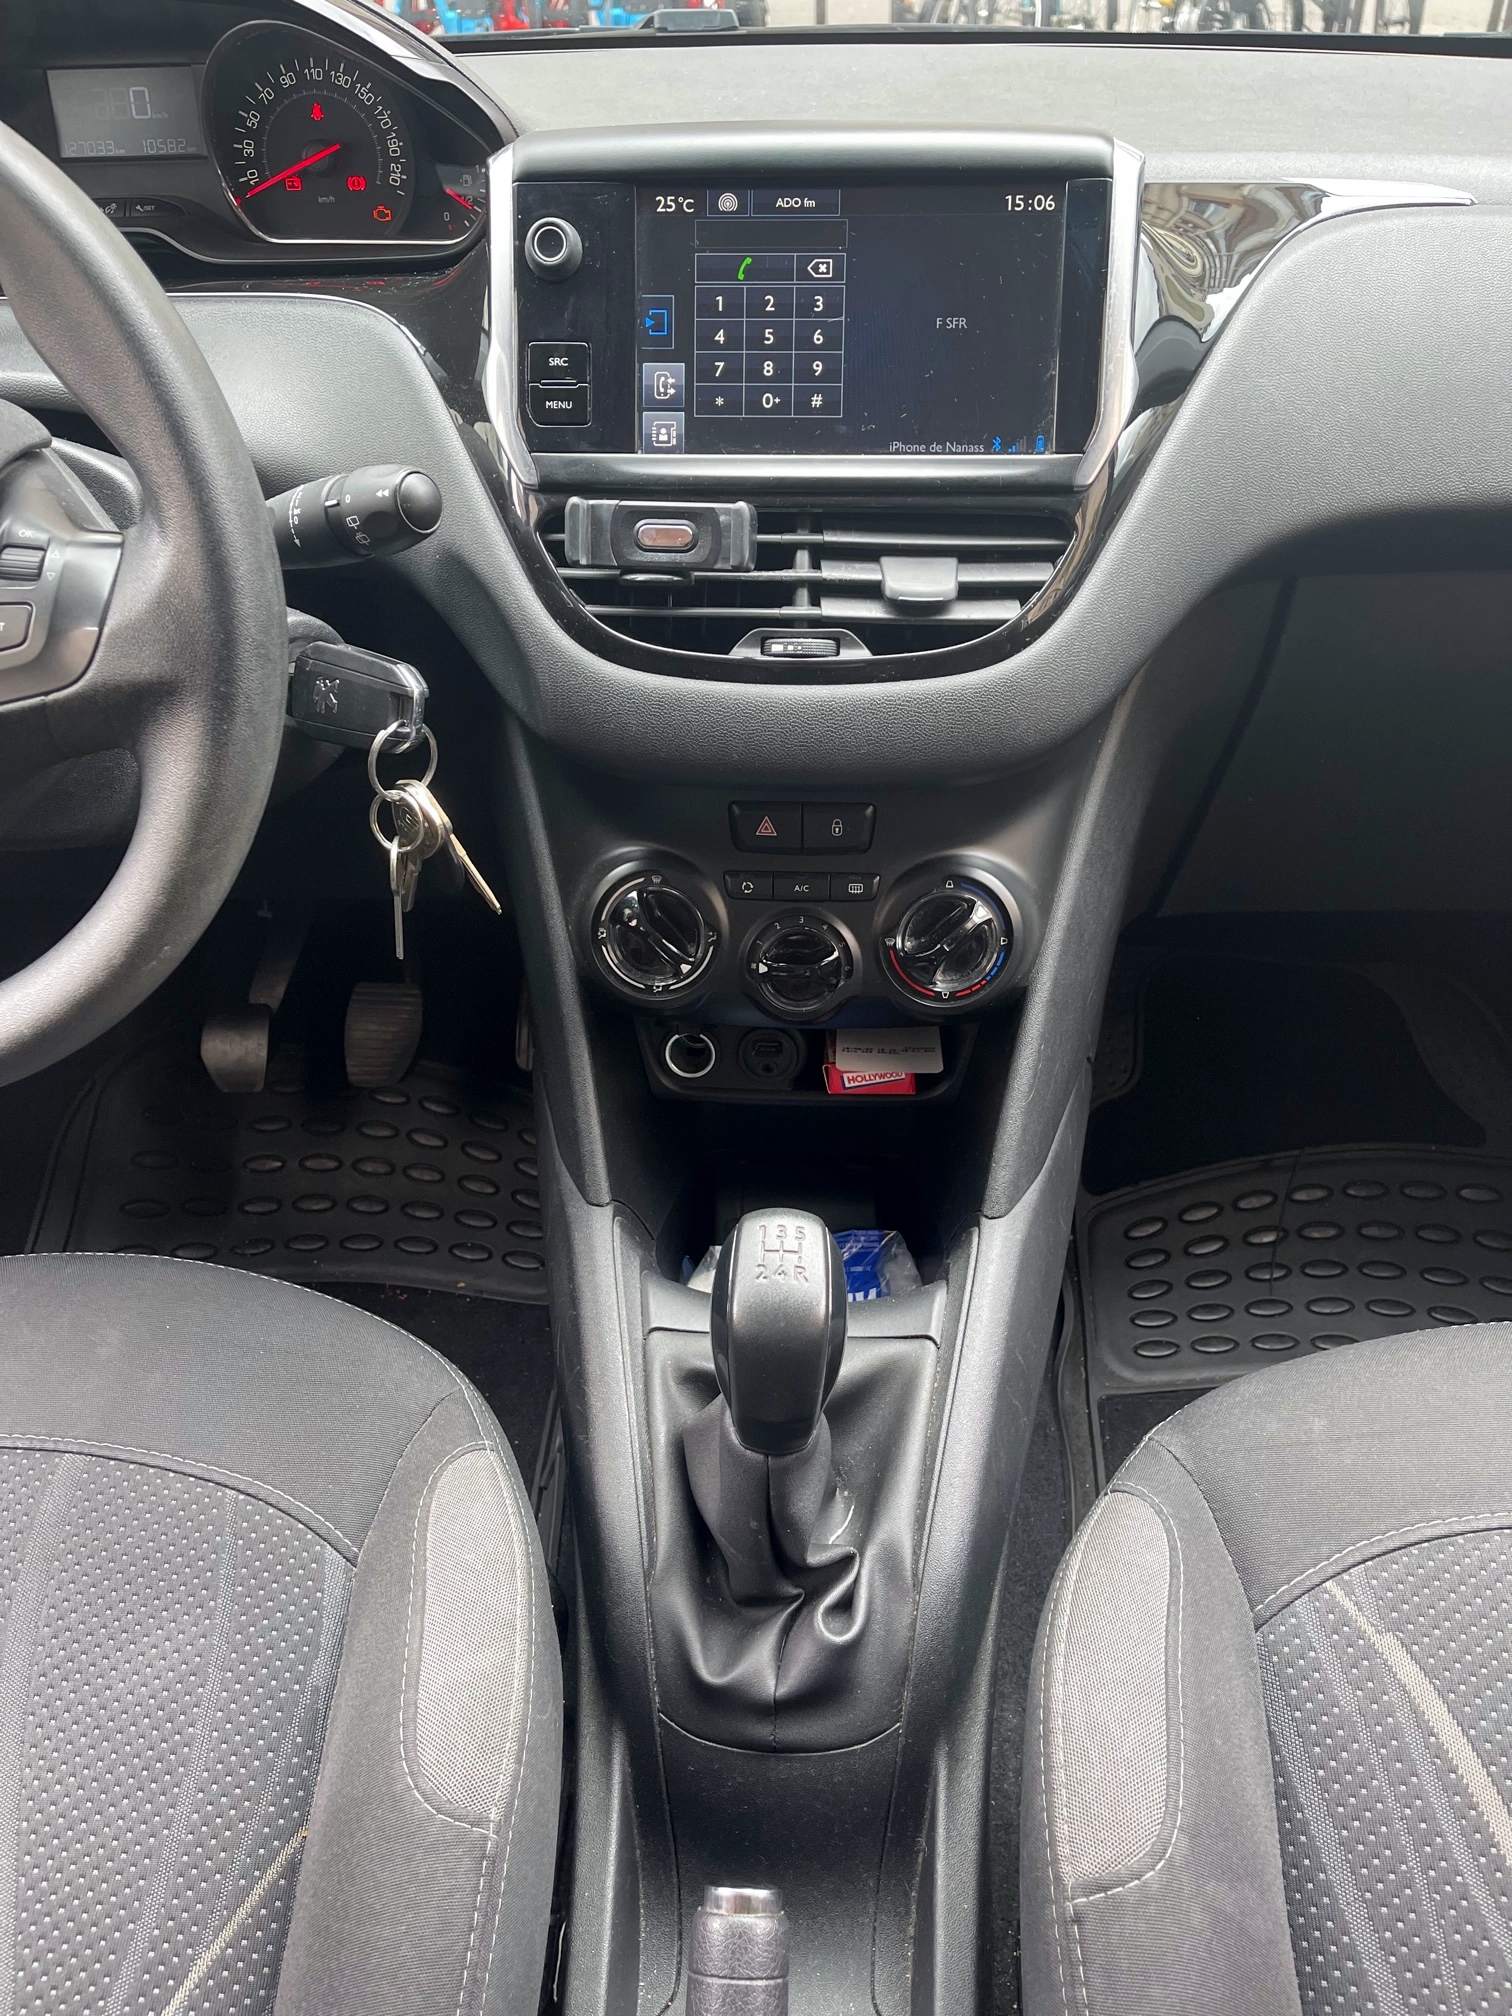 PEUGEOT 208 1.4 HDI 68 ACTIVE 14